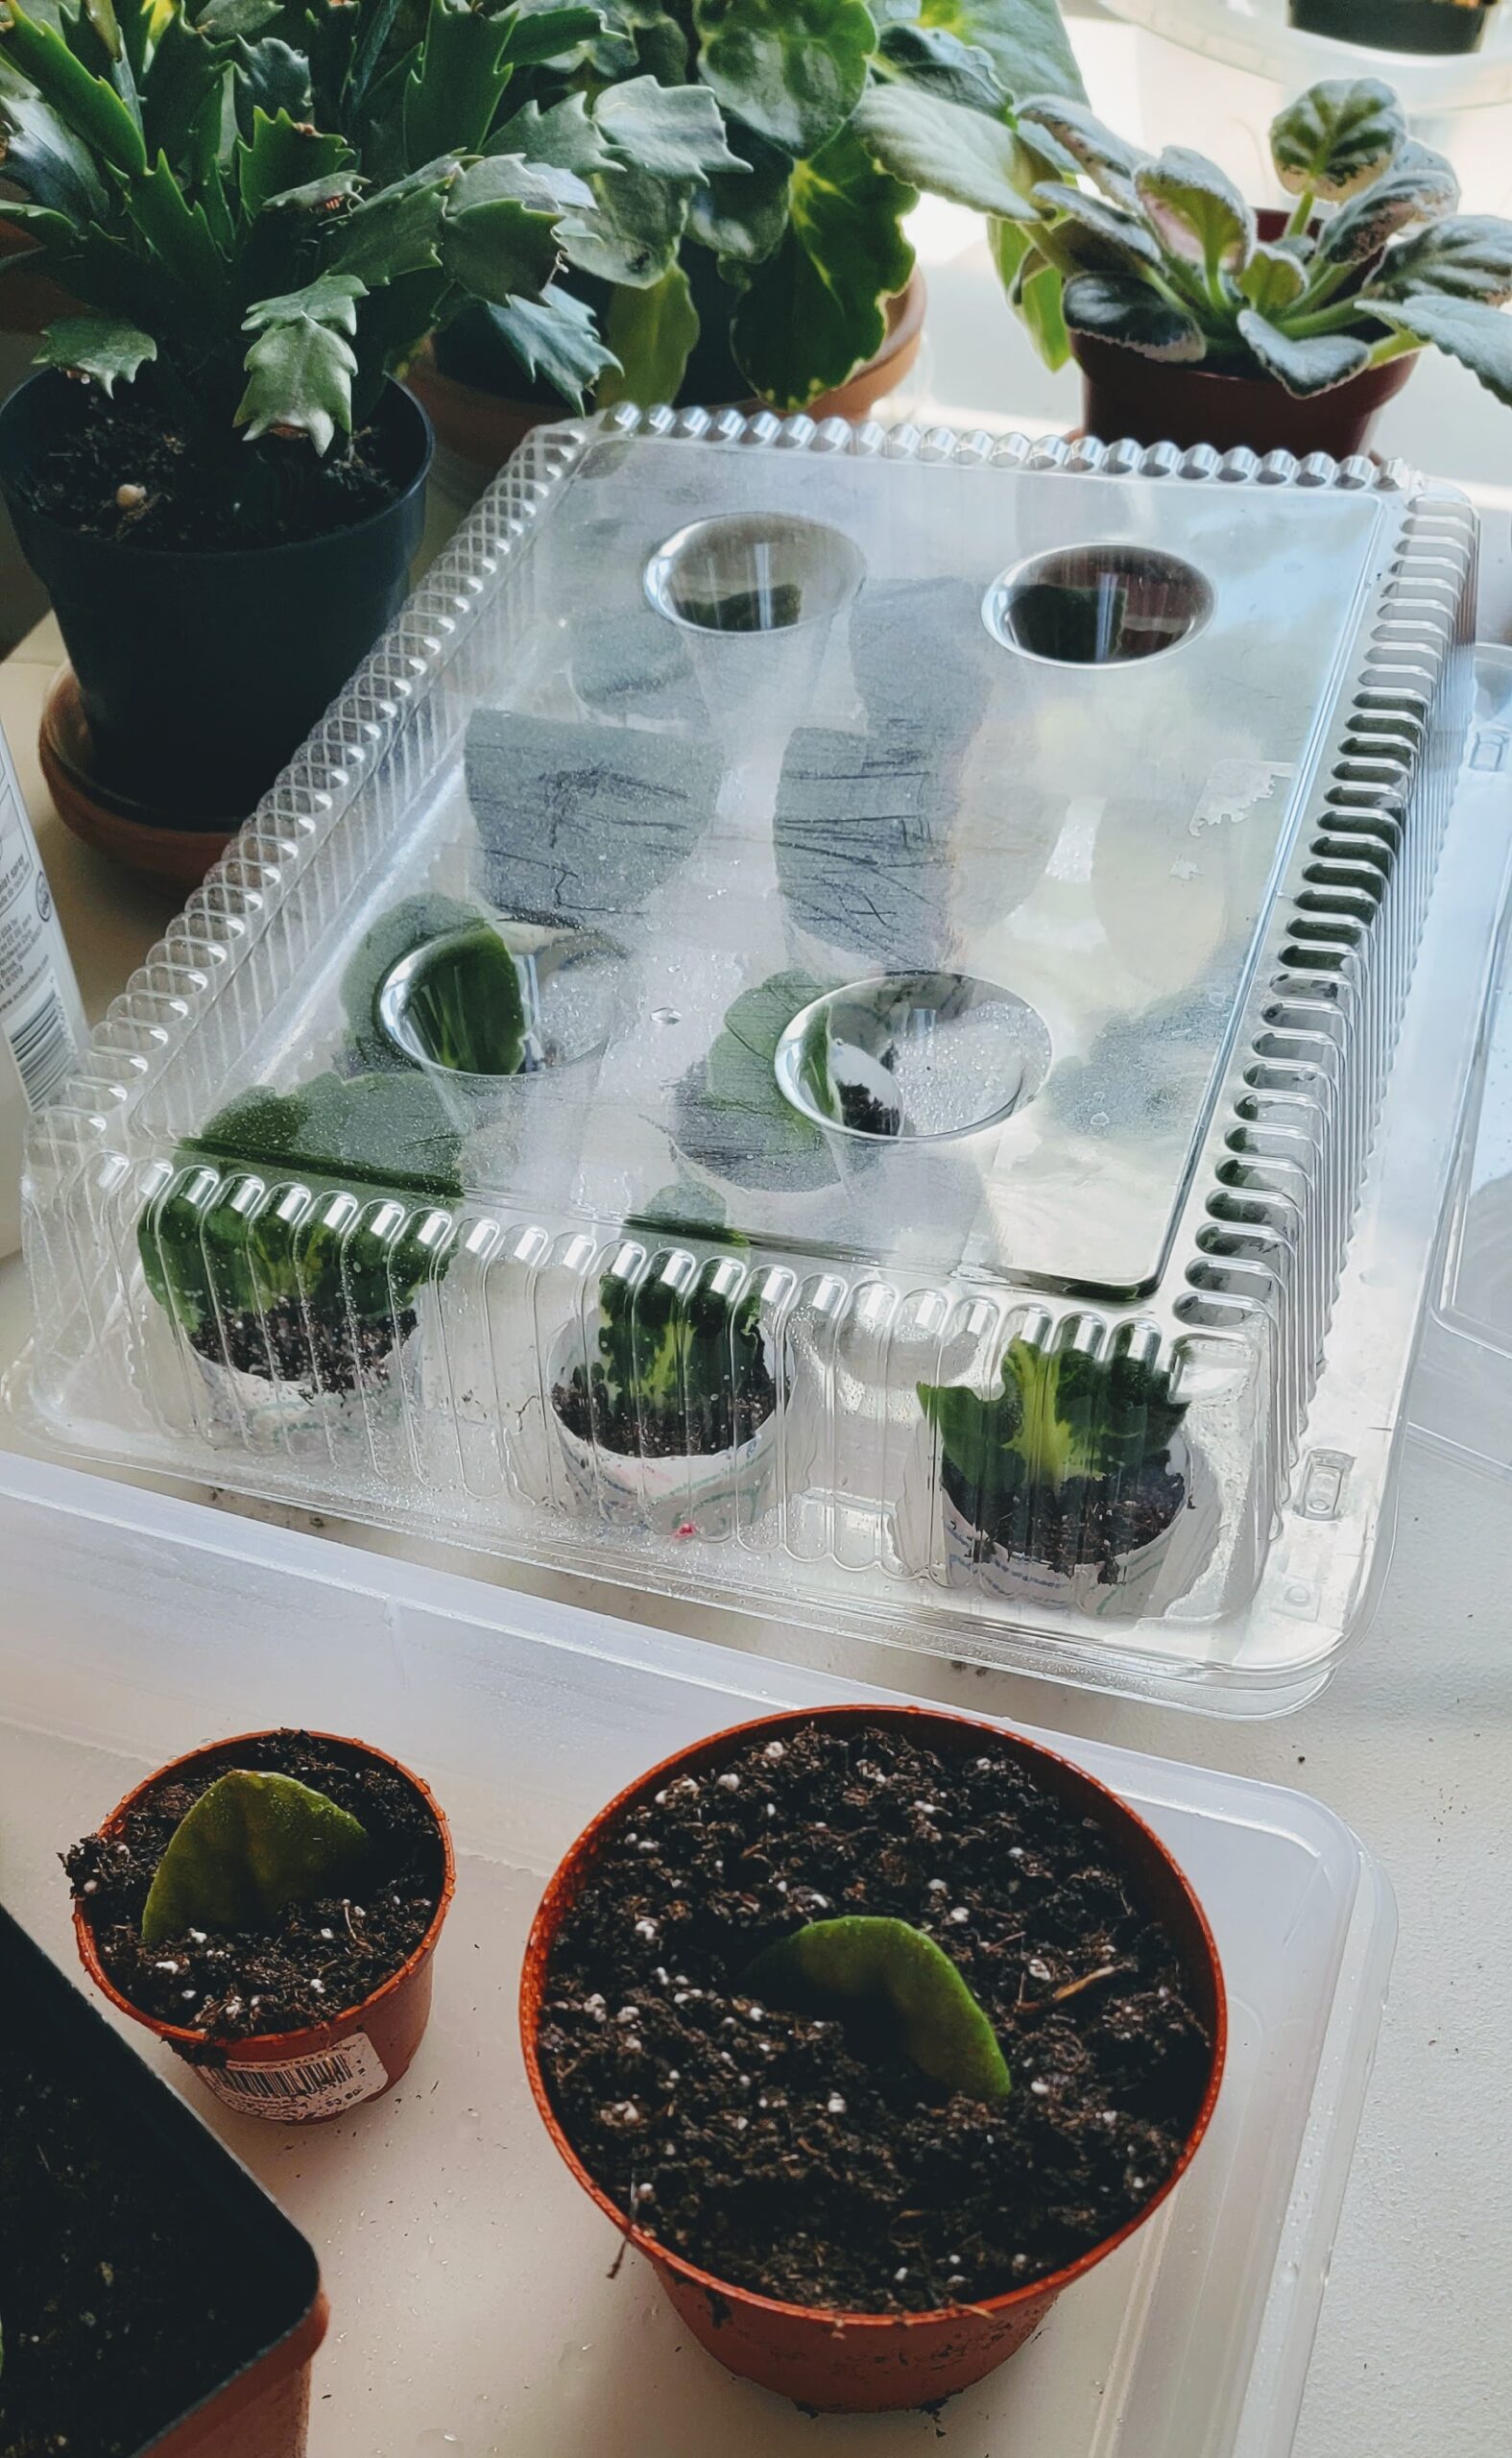 cupcake tray makes a great violet greenhouse